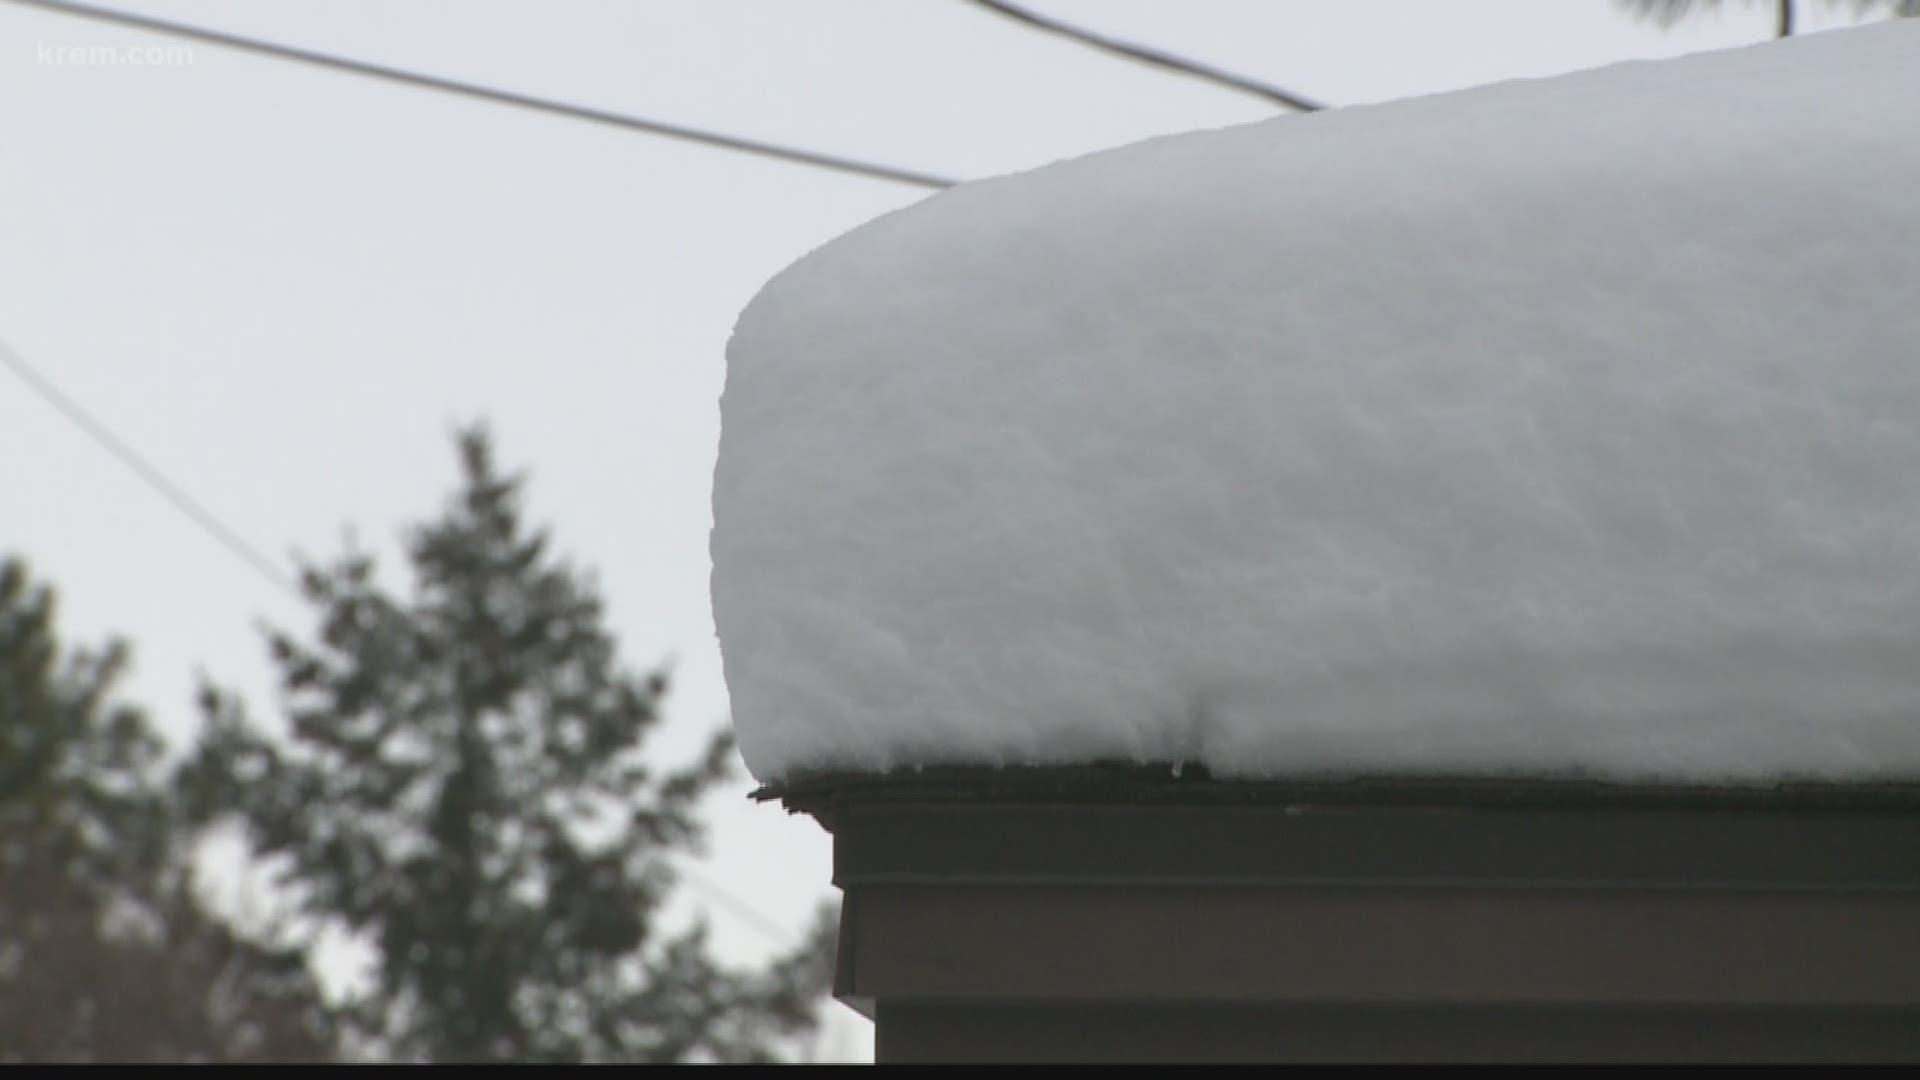 Snow can weigh down the structure of your roof. KREM's Shayna Waltower spoke with a roofing expert about if and when you should shovel your roof.